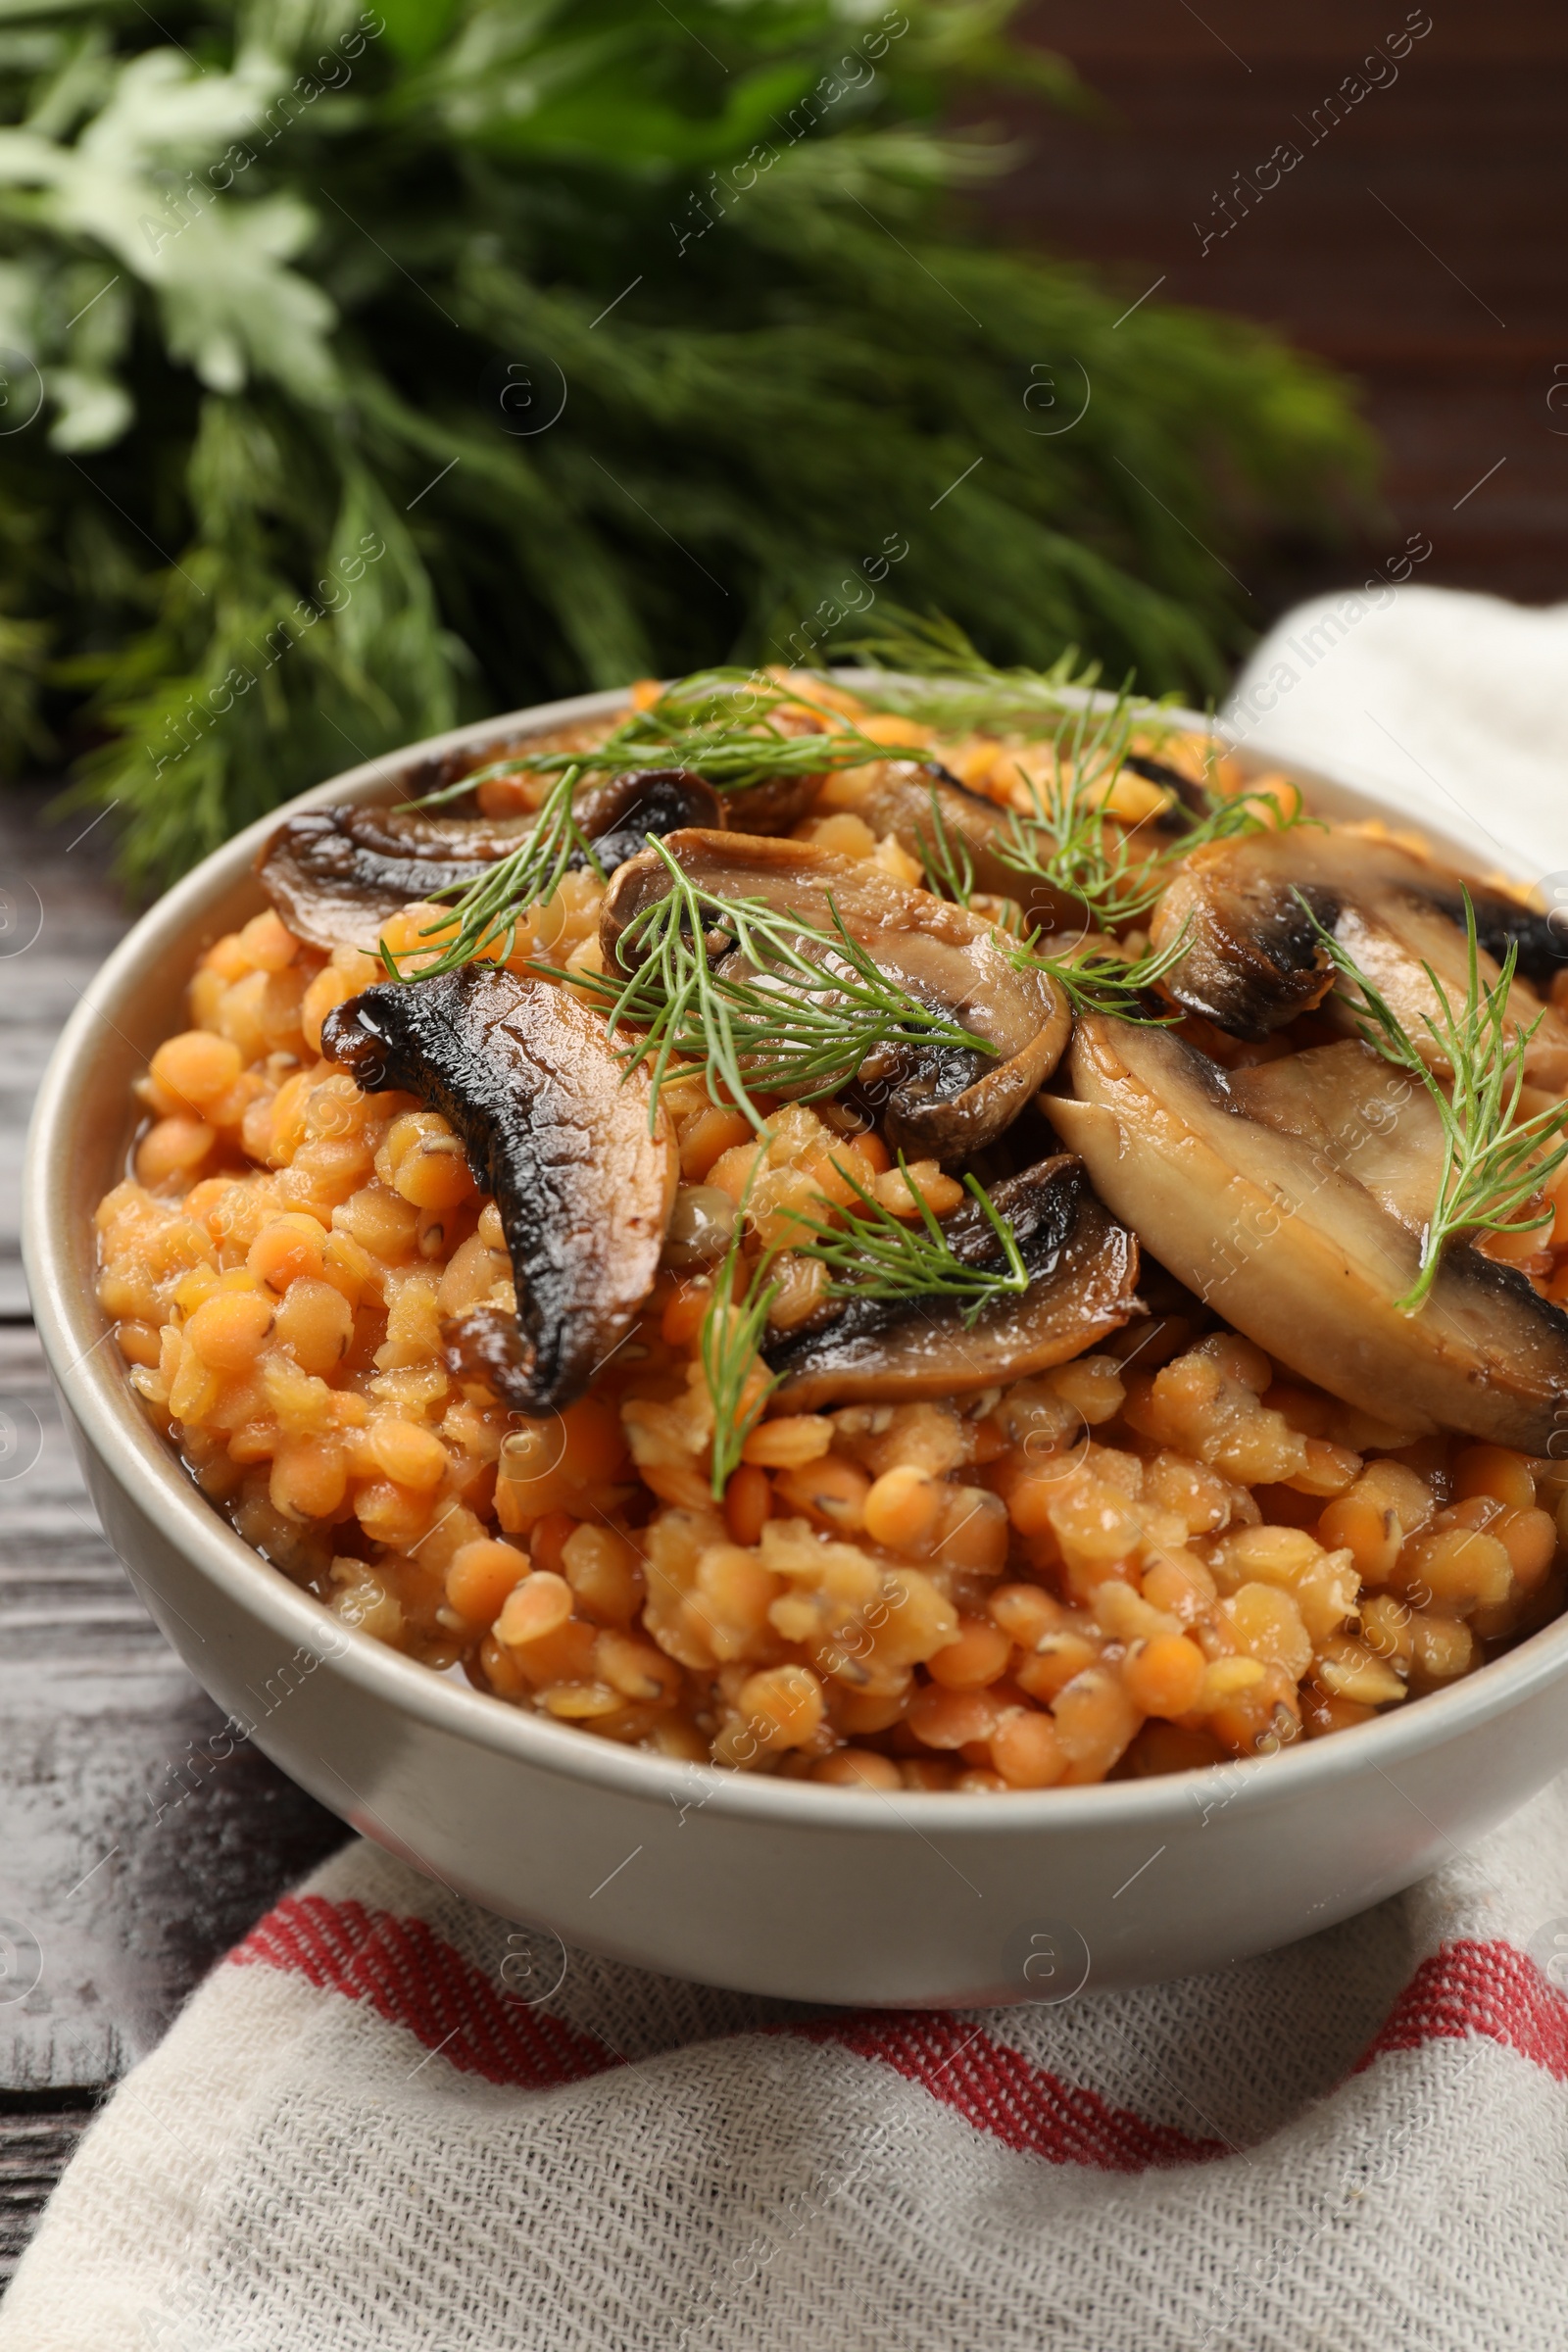 Photo of Delicious red lentils with mushrooms and dill in bowl on table, closeup